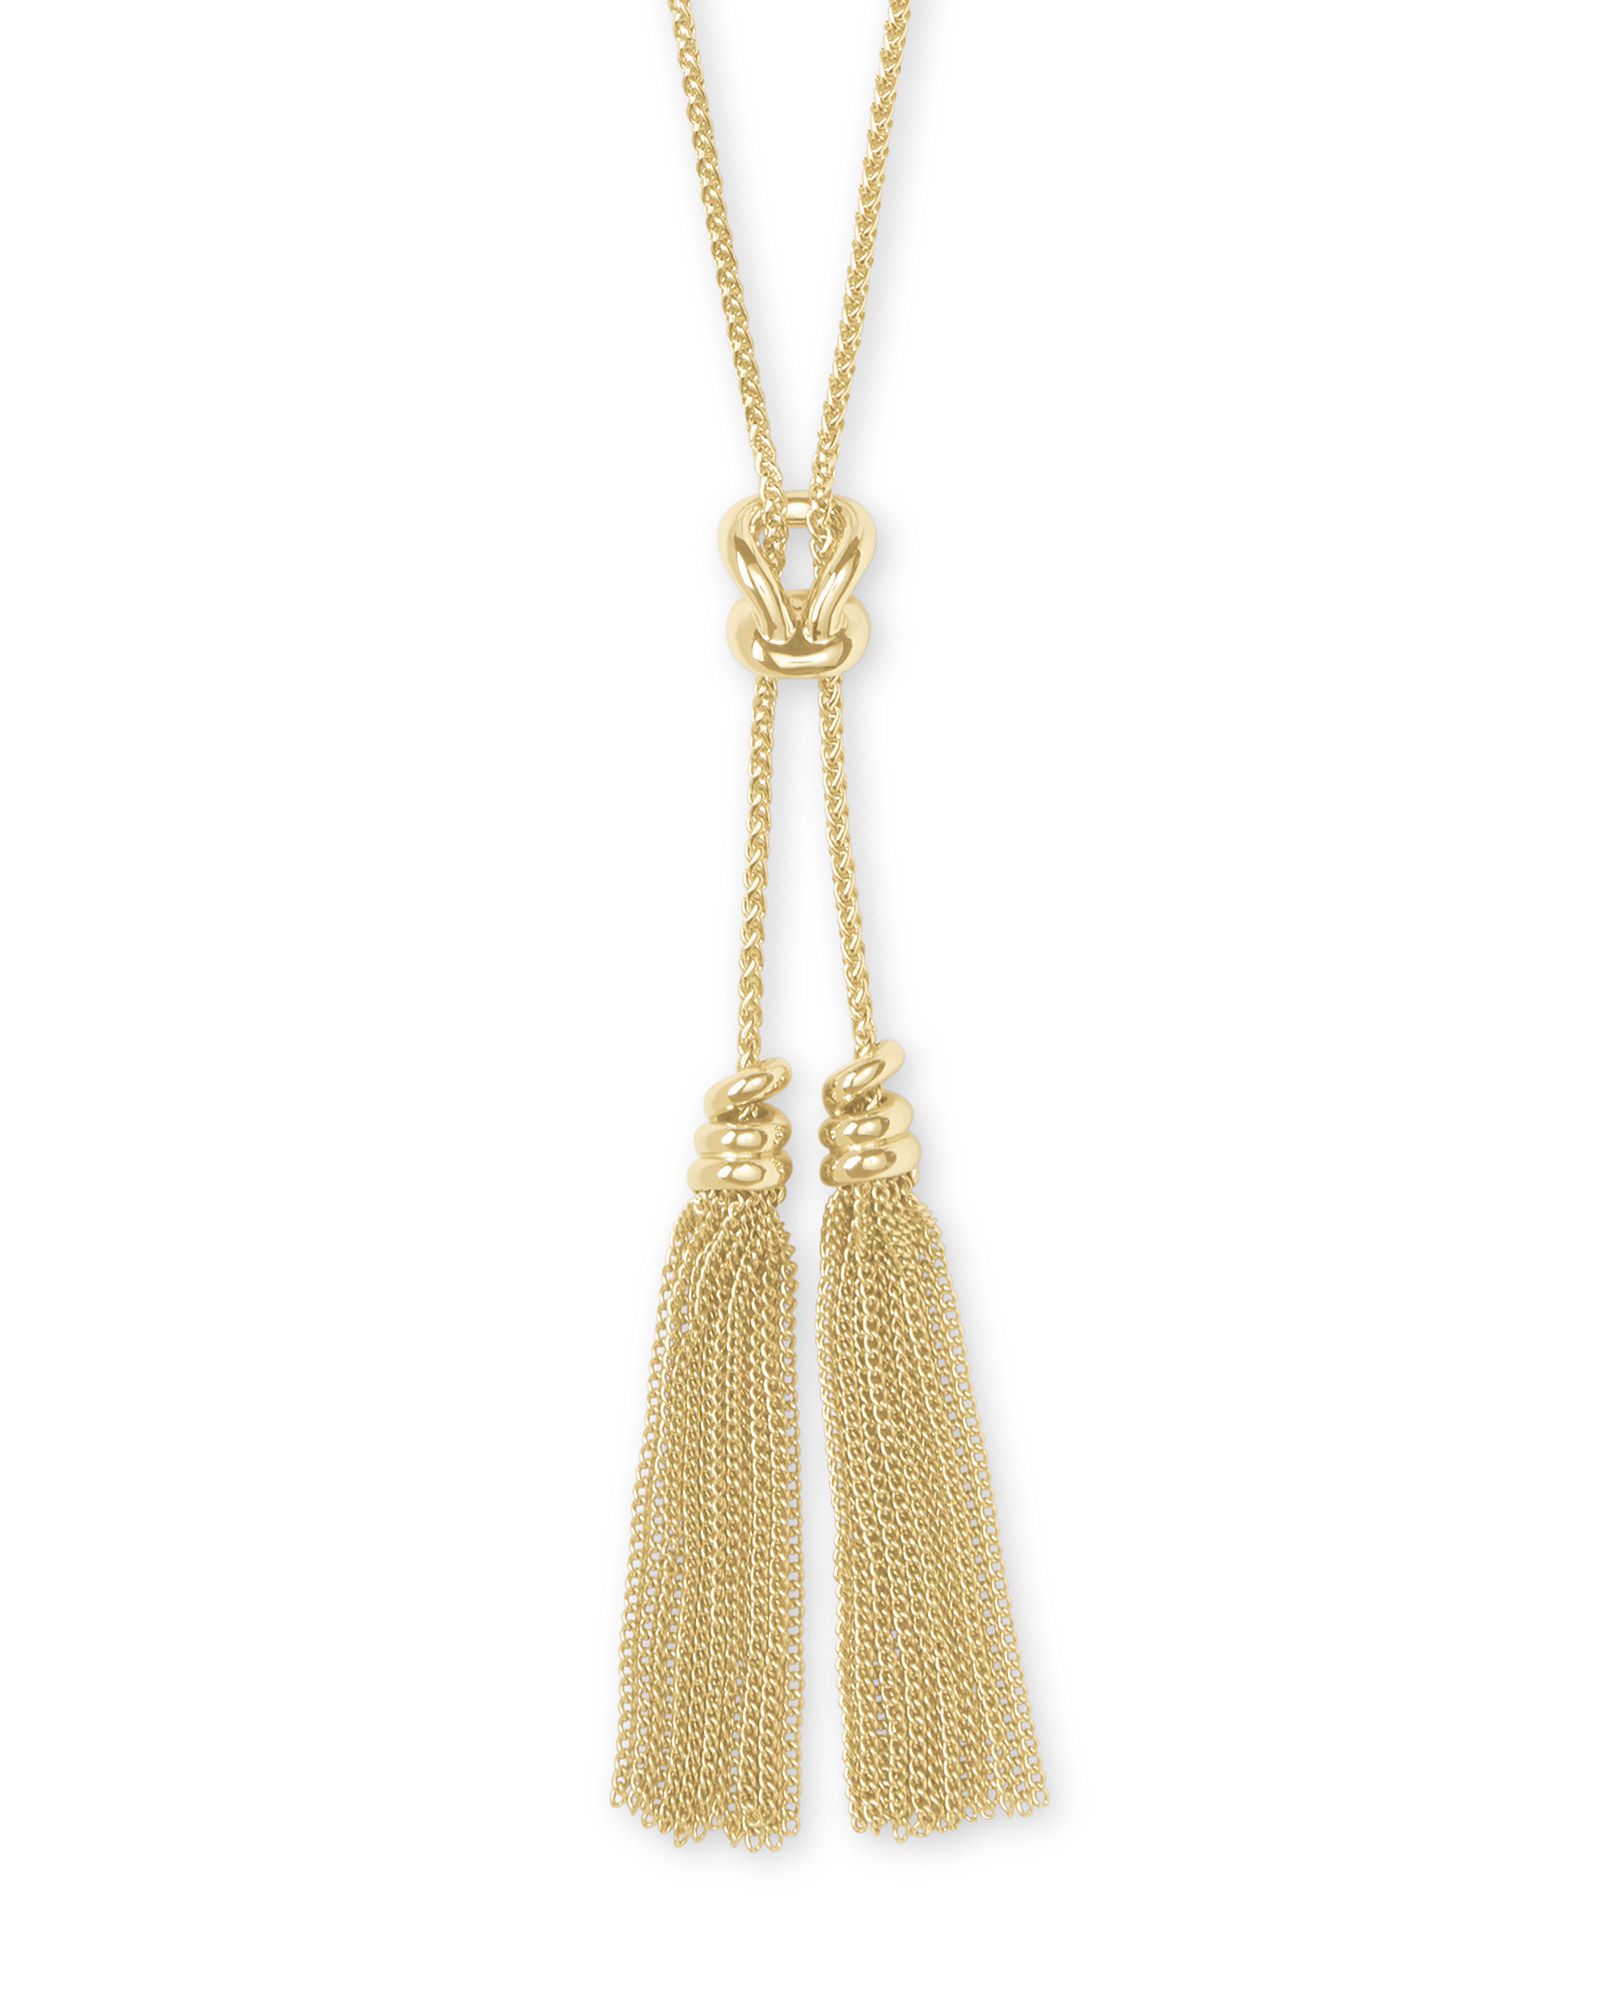 Presleigh Love Knot Y Necklace in Gold | Kendra Scott